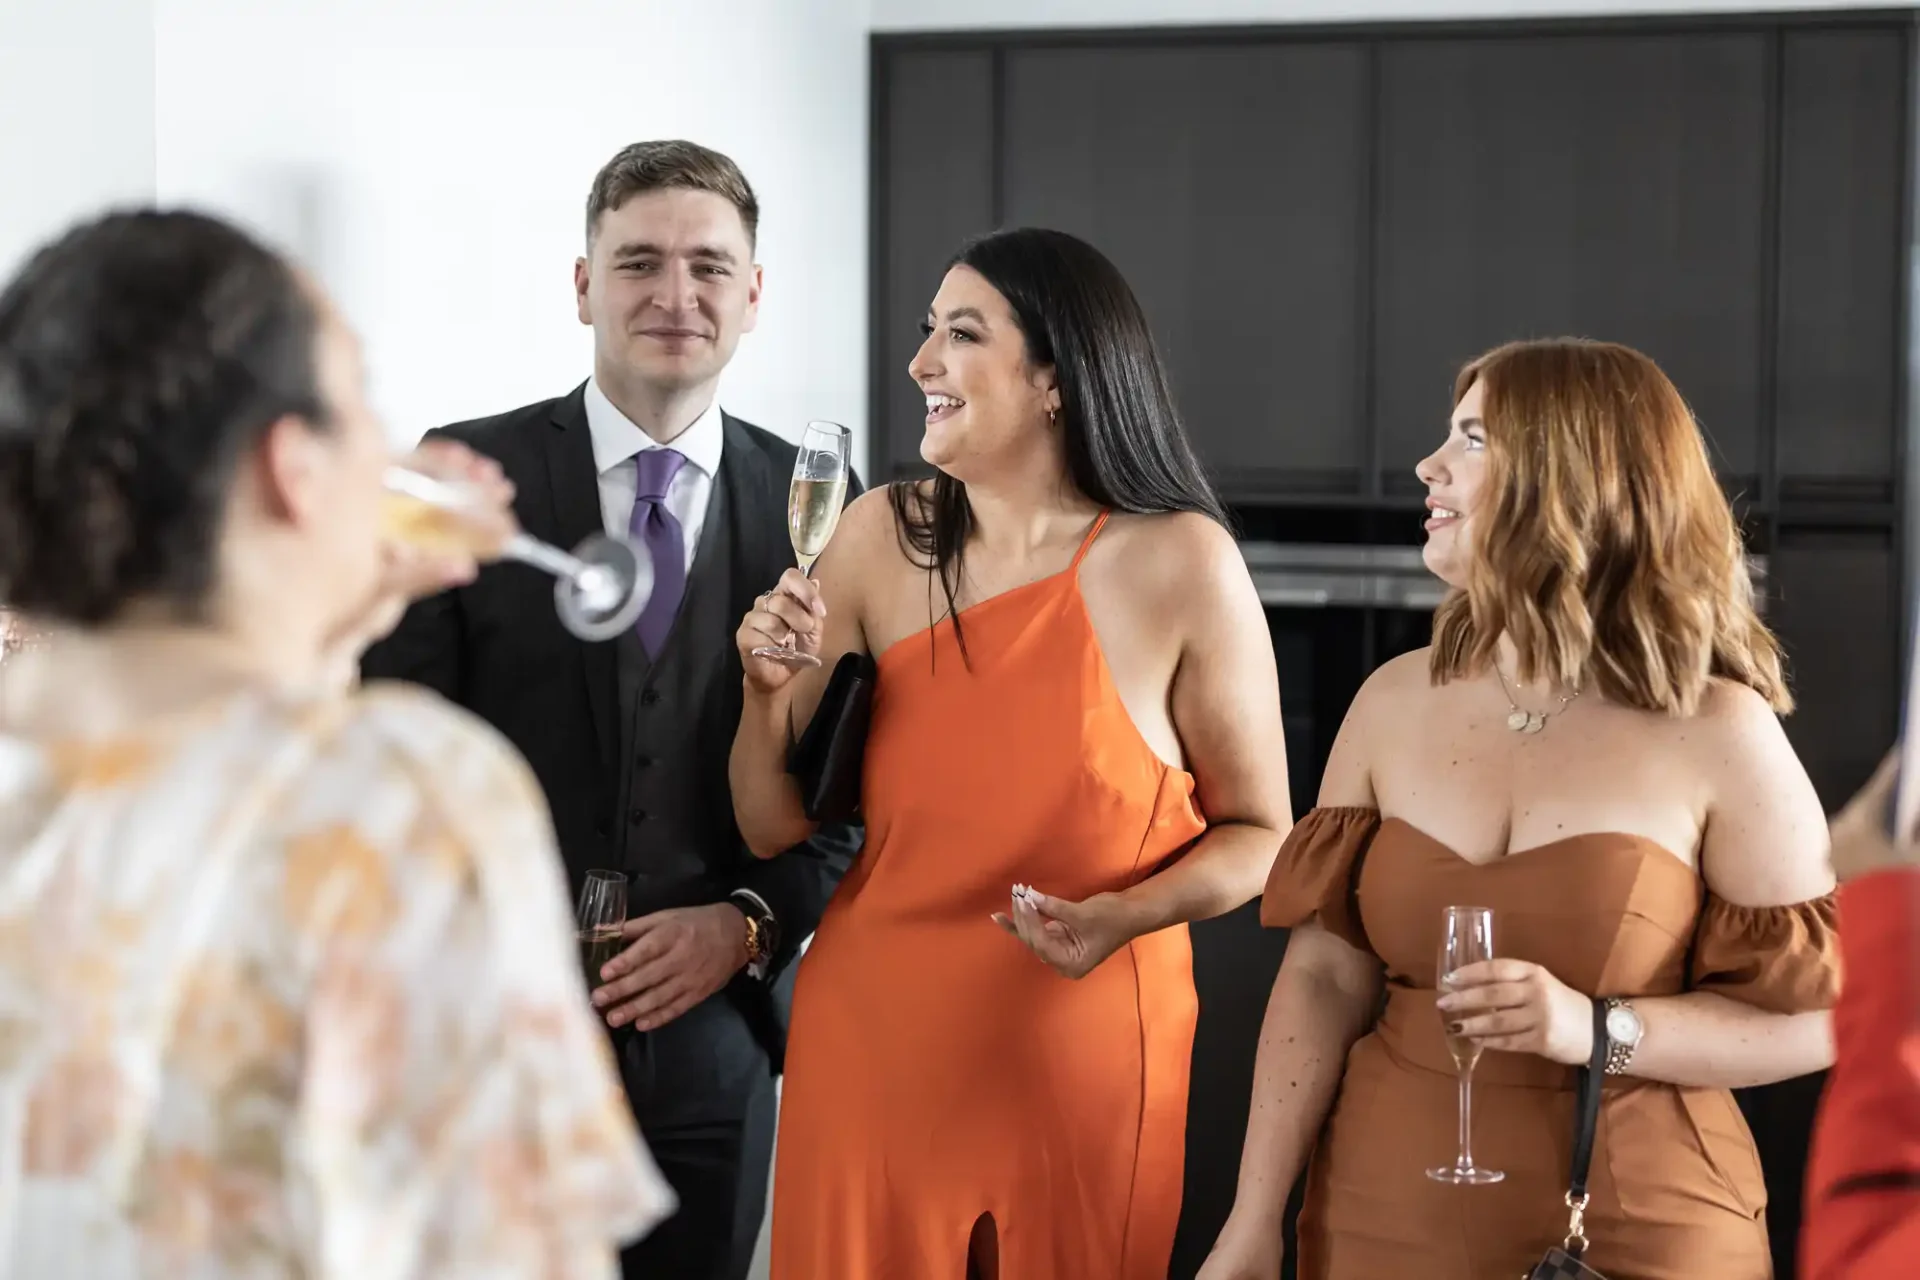 A group of people smiling and socializing at a party, holding champagne flutes, with a woman in an orange dress speaking animatedly.